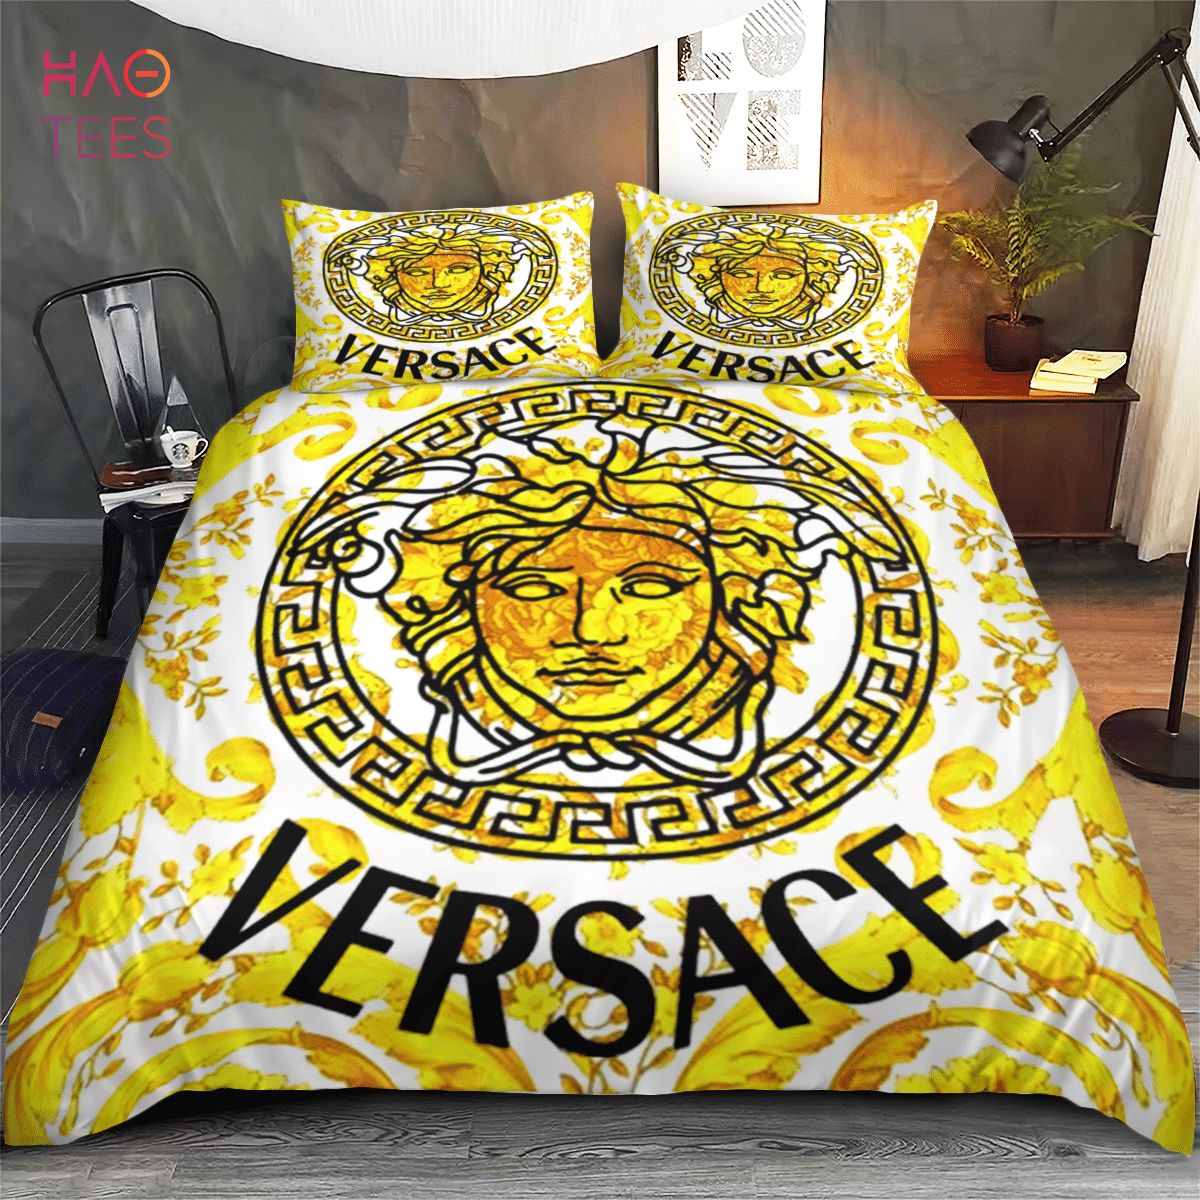 [NEW] Vercase LV Luxury Brand Bedding Sets Limited Edition